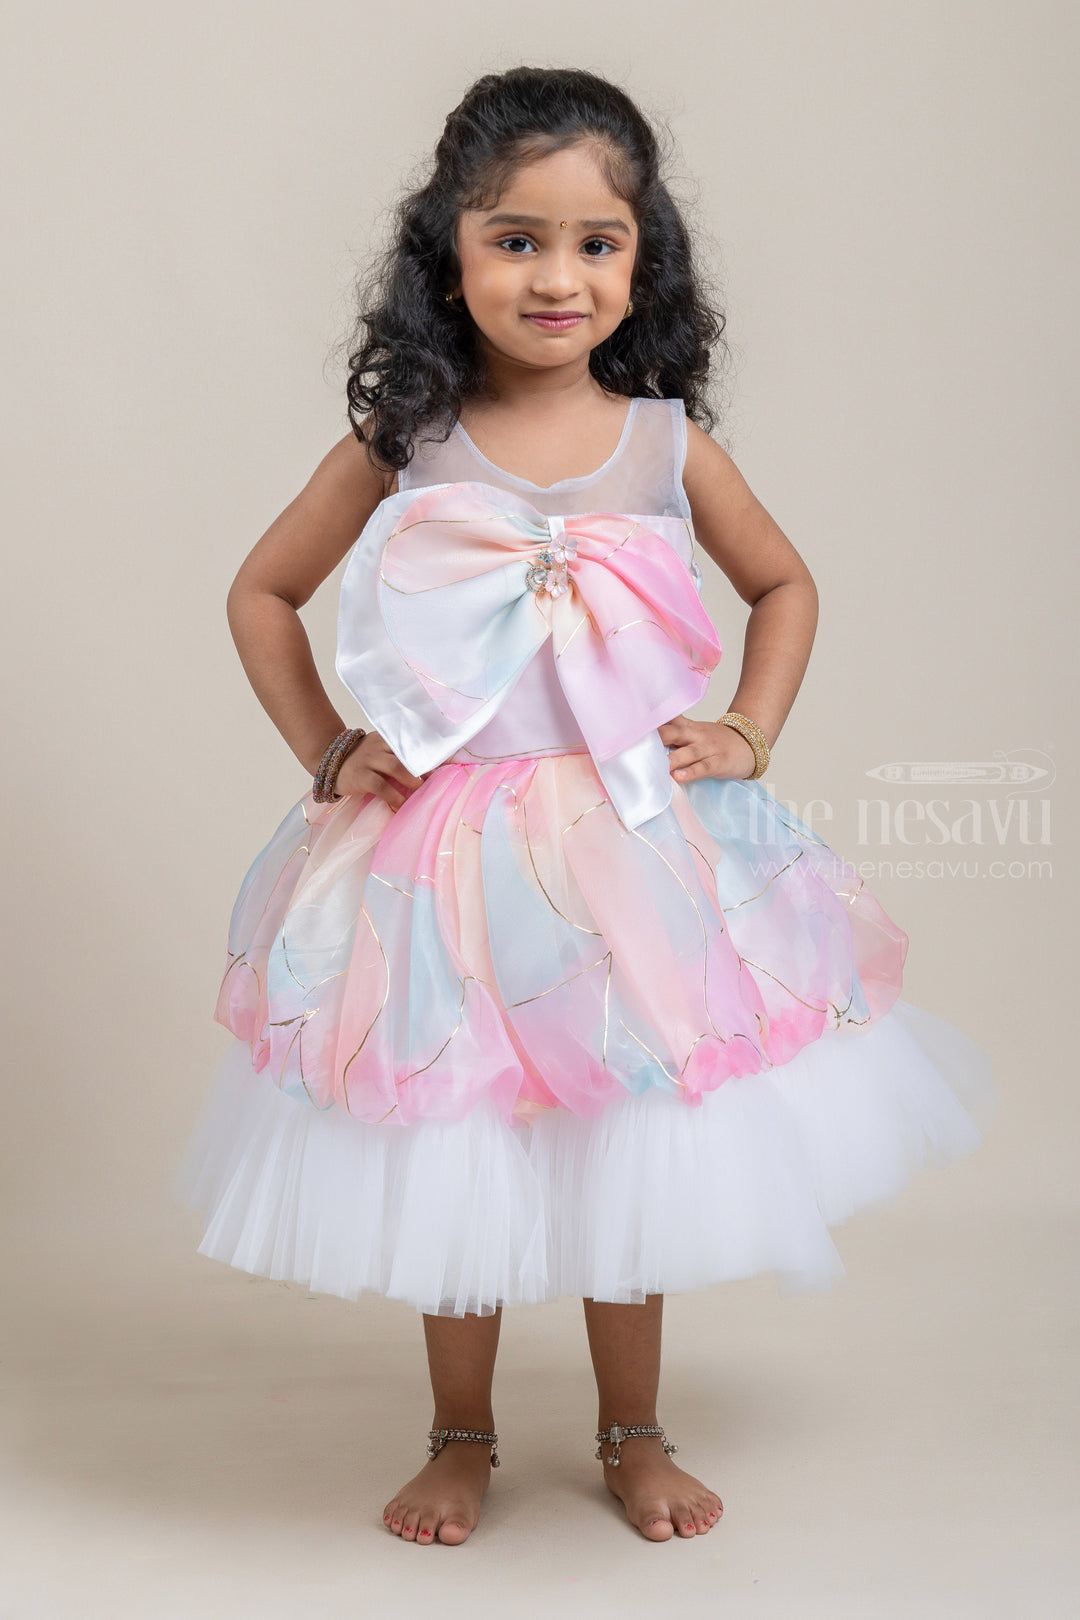 The Nesavu Party Frock Dazzling Flared Pink Organza Party Wear Frock For Baby Girls psr silks Nesavu 16 (1Y) / Pink PF121A